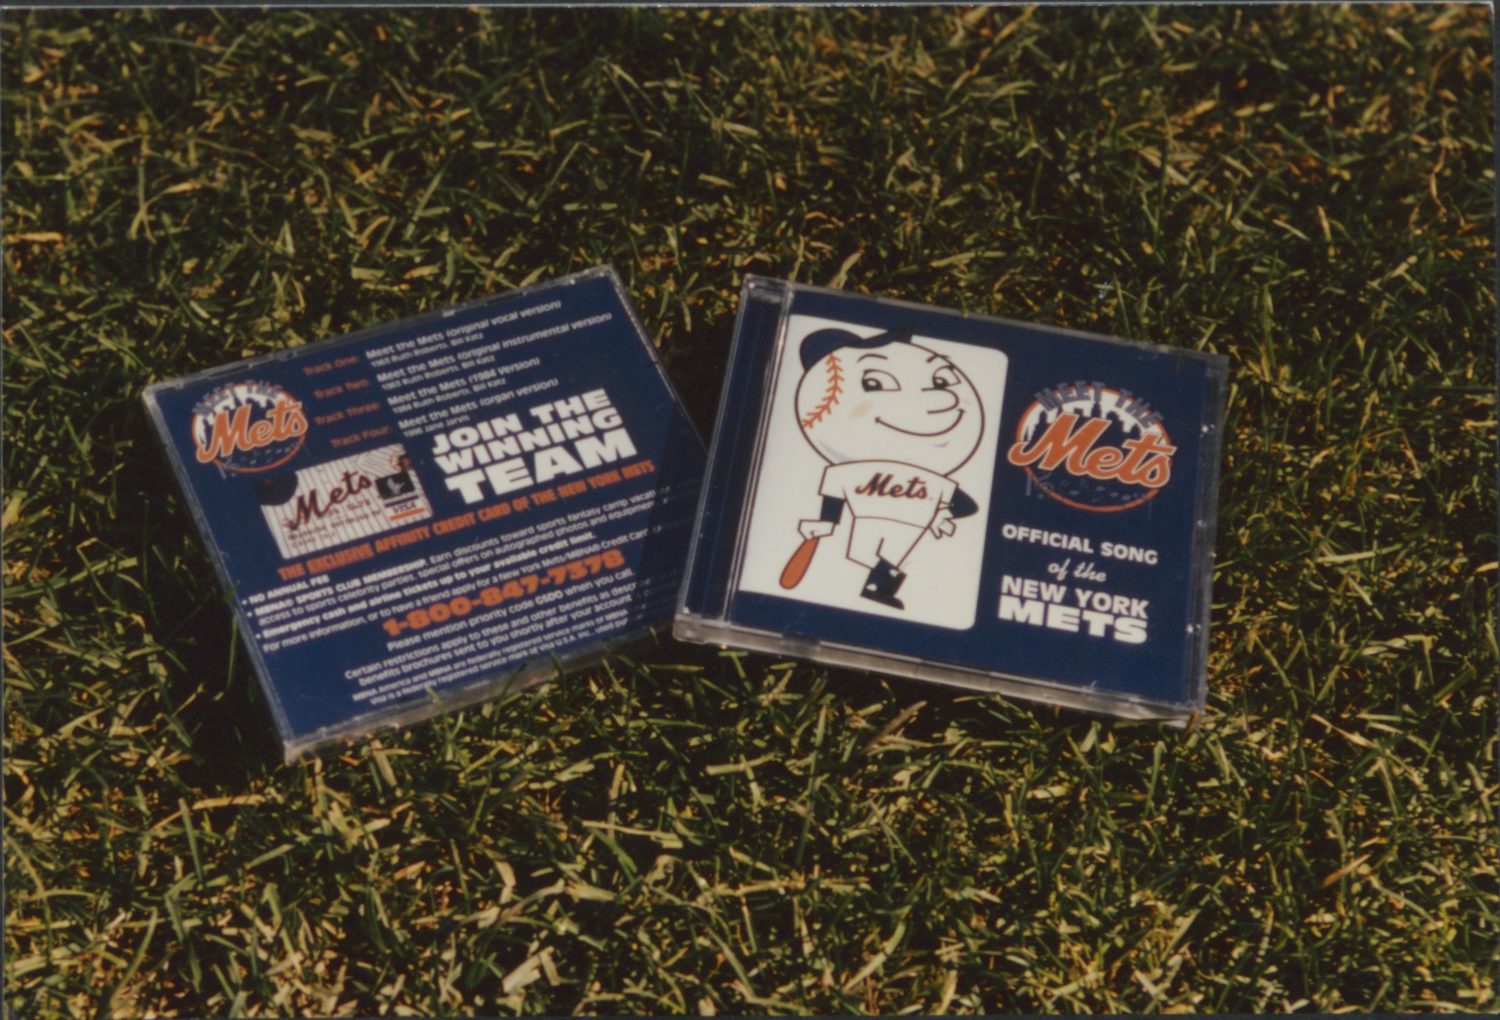 Mets Official Song on CD